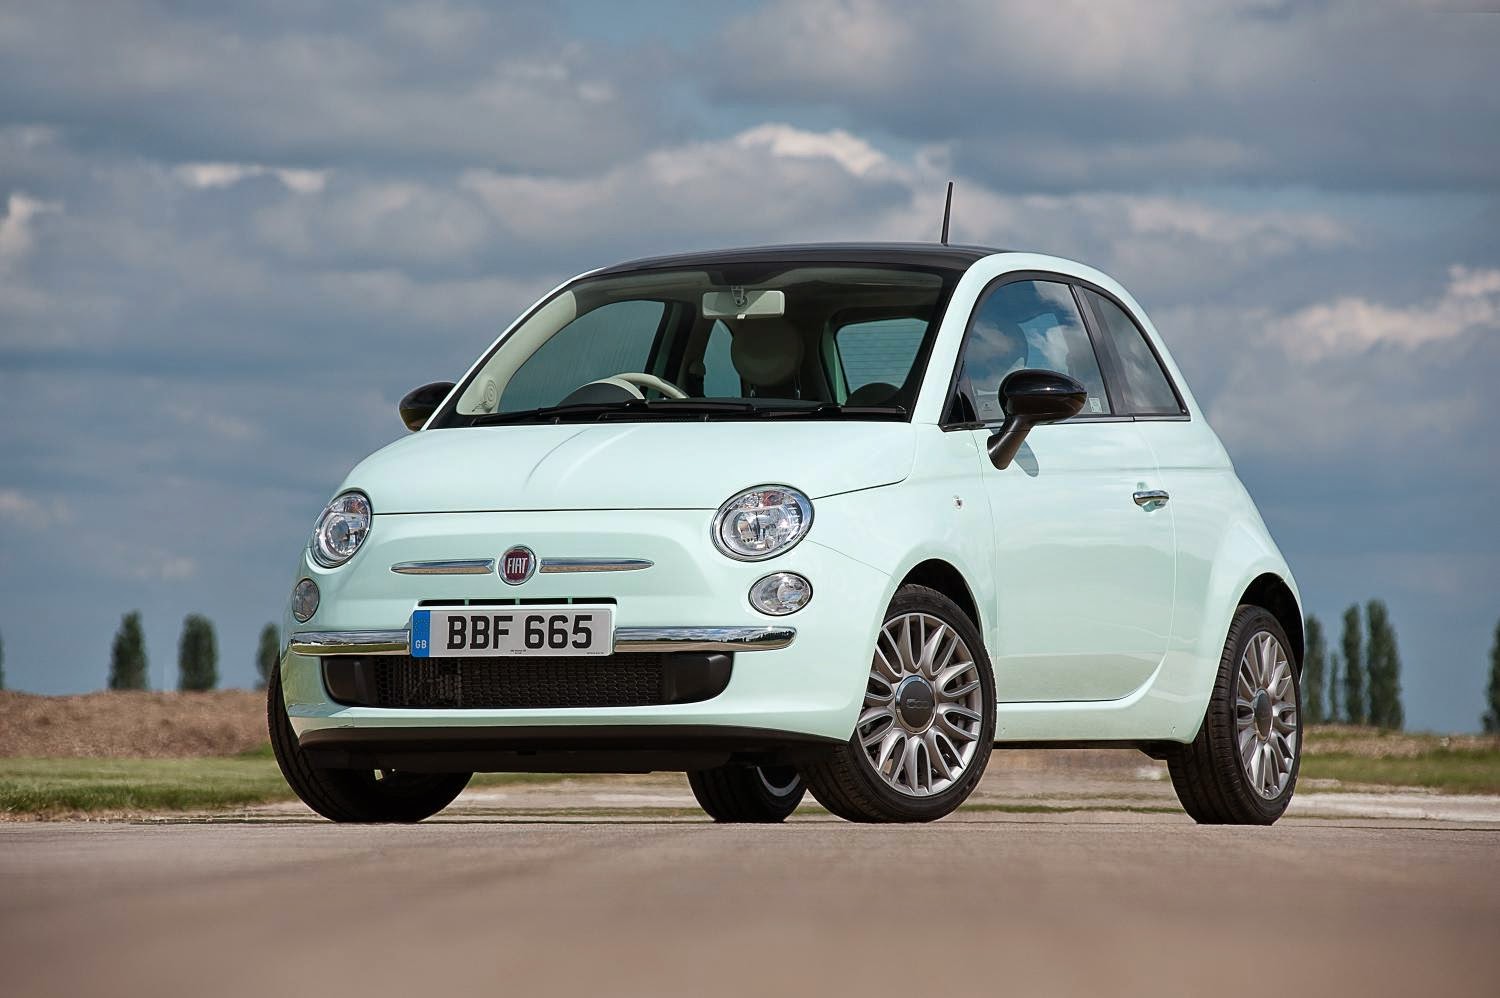 Fiat S New Lease Deal For The 500 Is Young At Heart